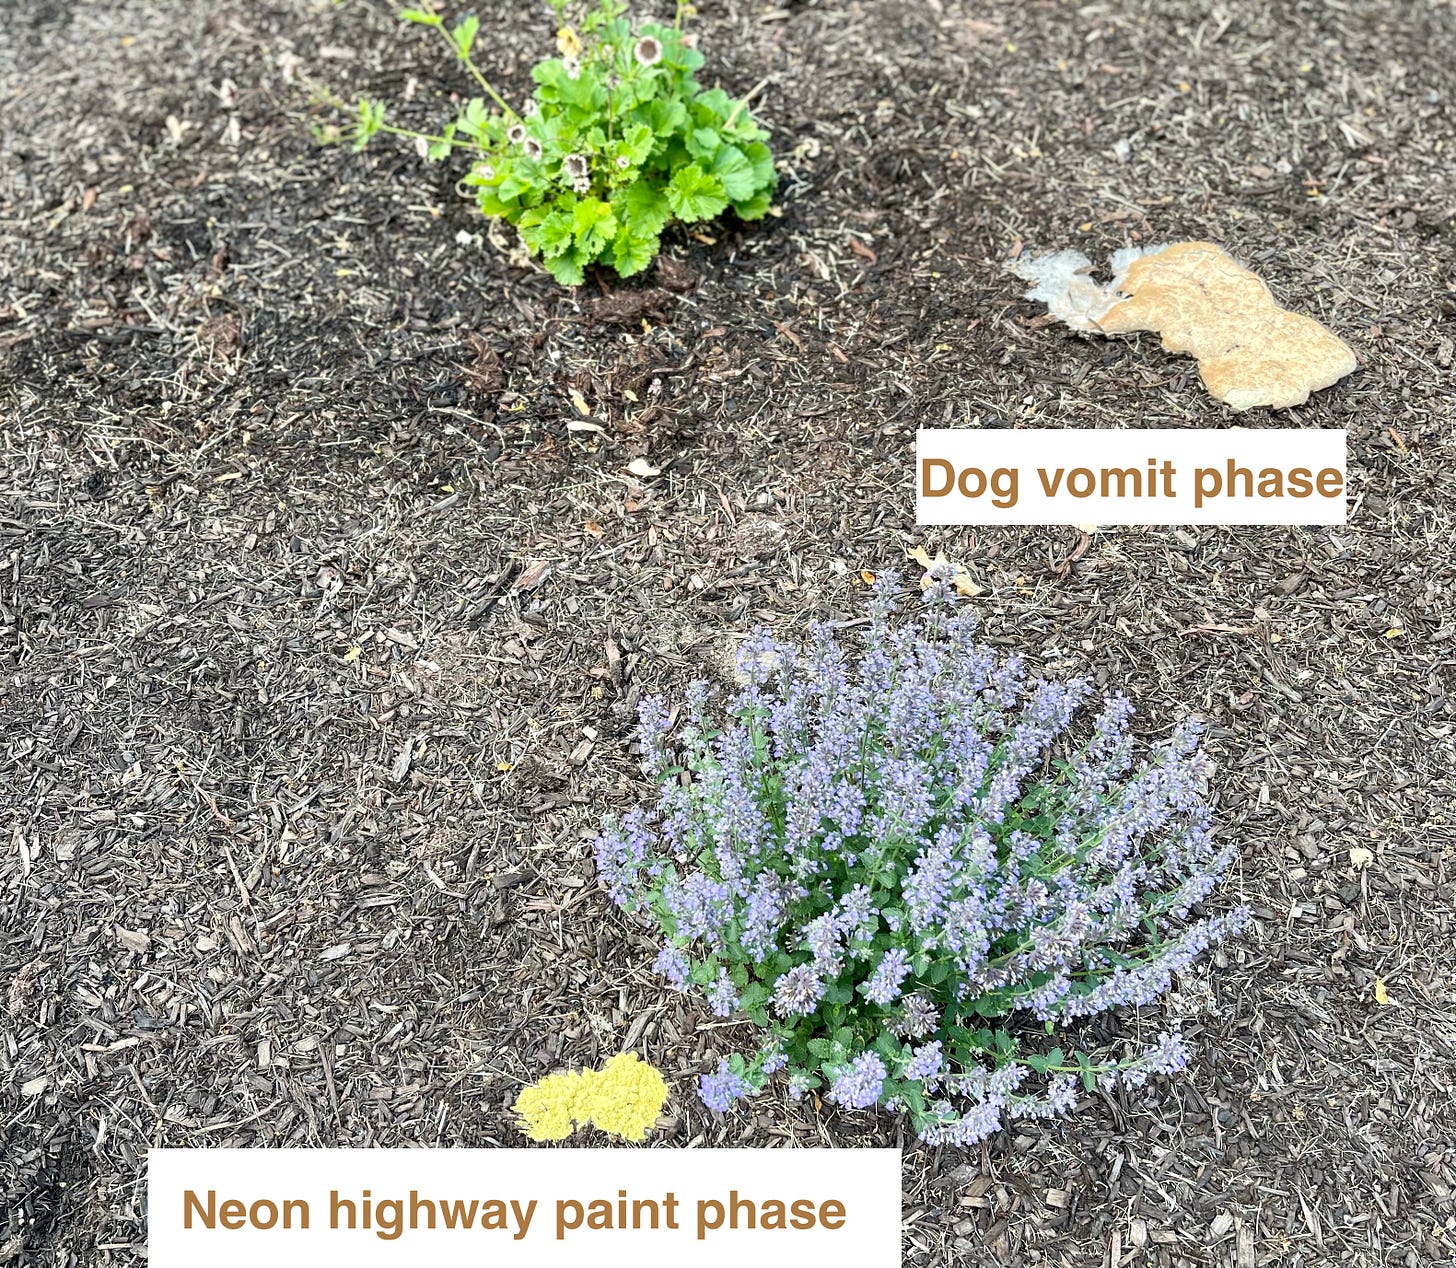 Examples of two phases of the slime mold, dog vomit beige and neon highway paint yellow